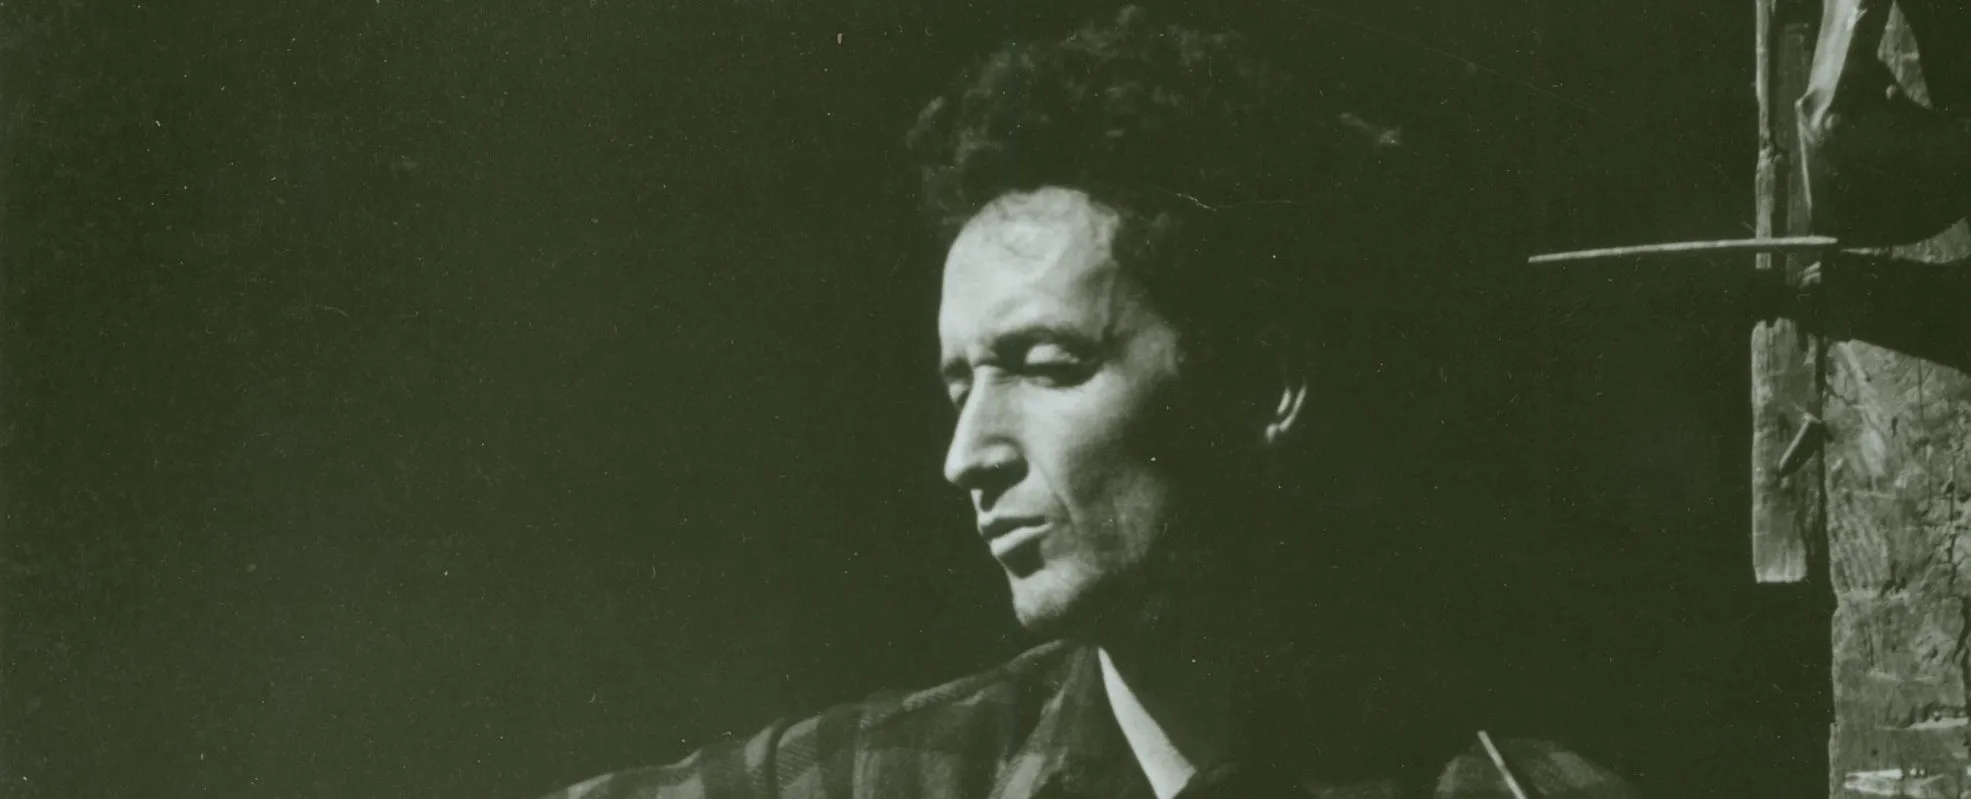 New Woody Guthrie Exhibit Set For February